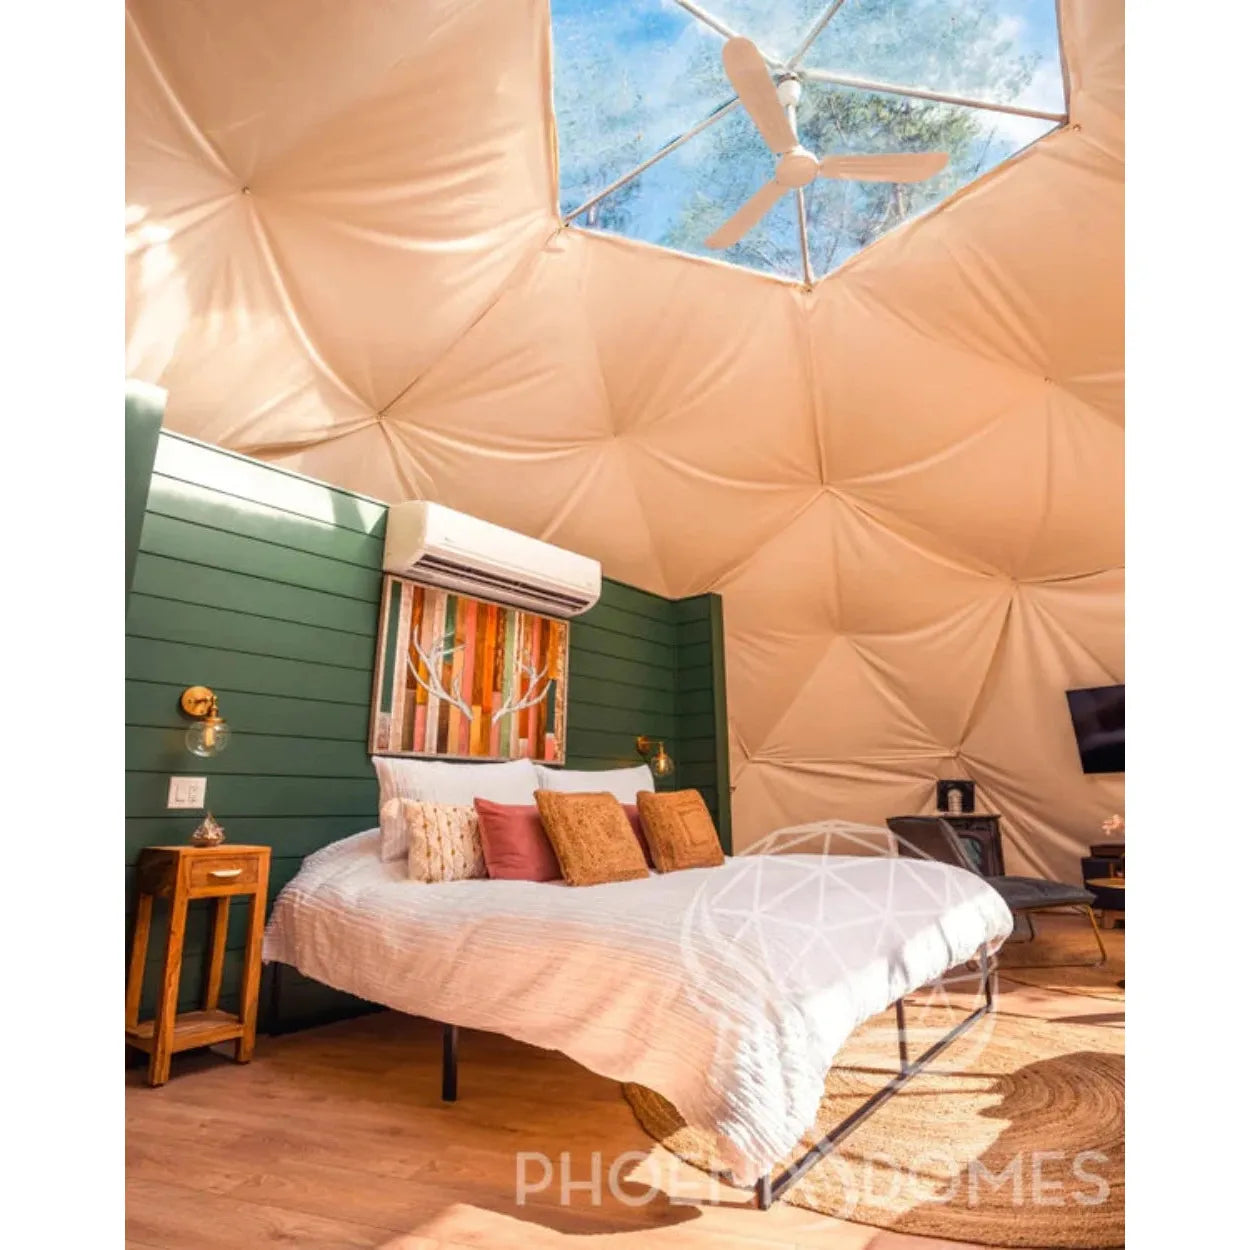 4-season-deluxe-glamping-package-dome-26-8m-179